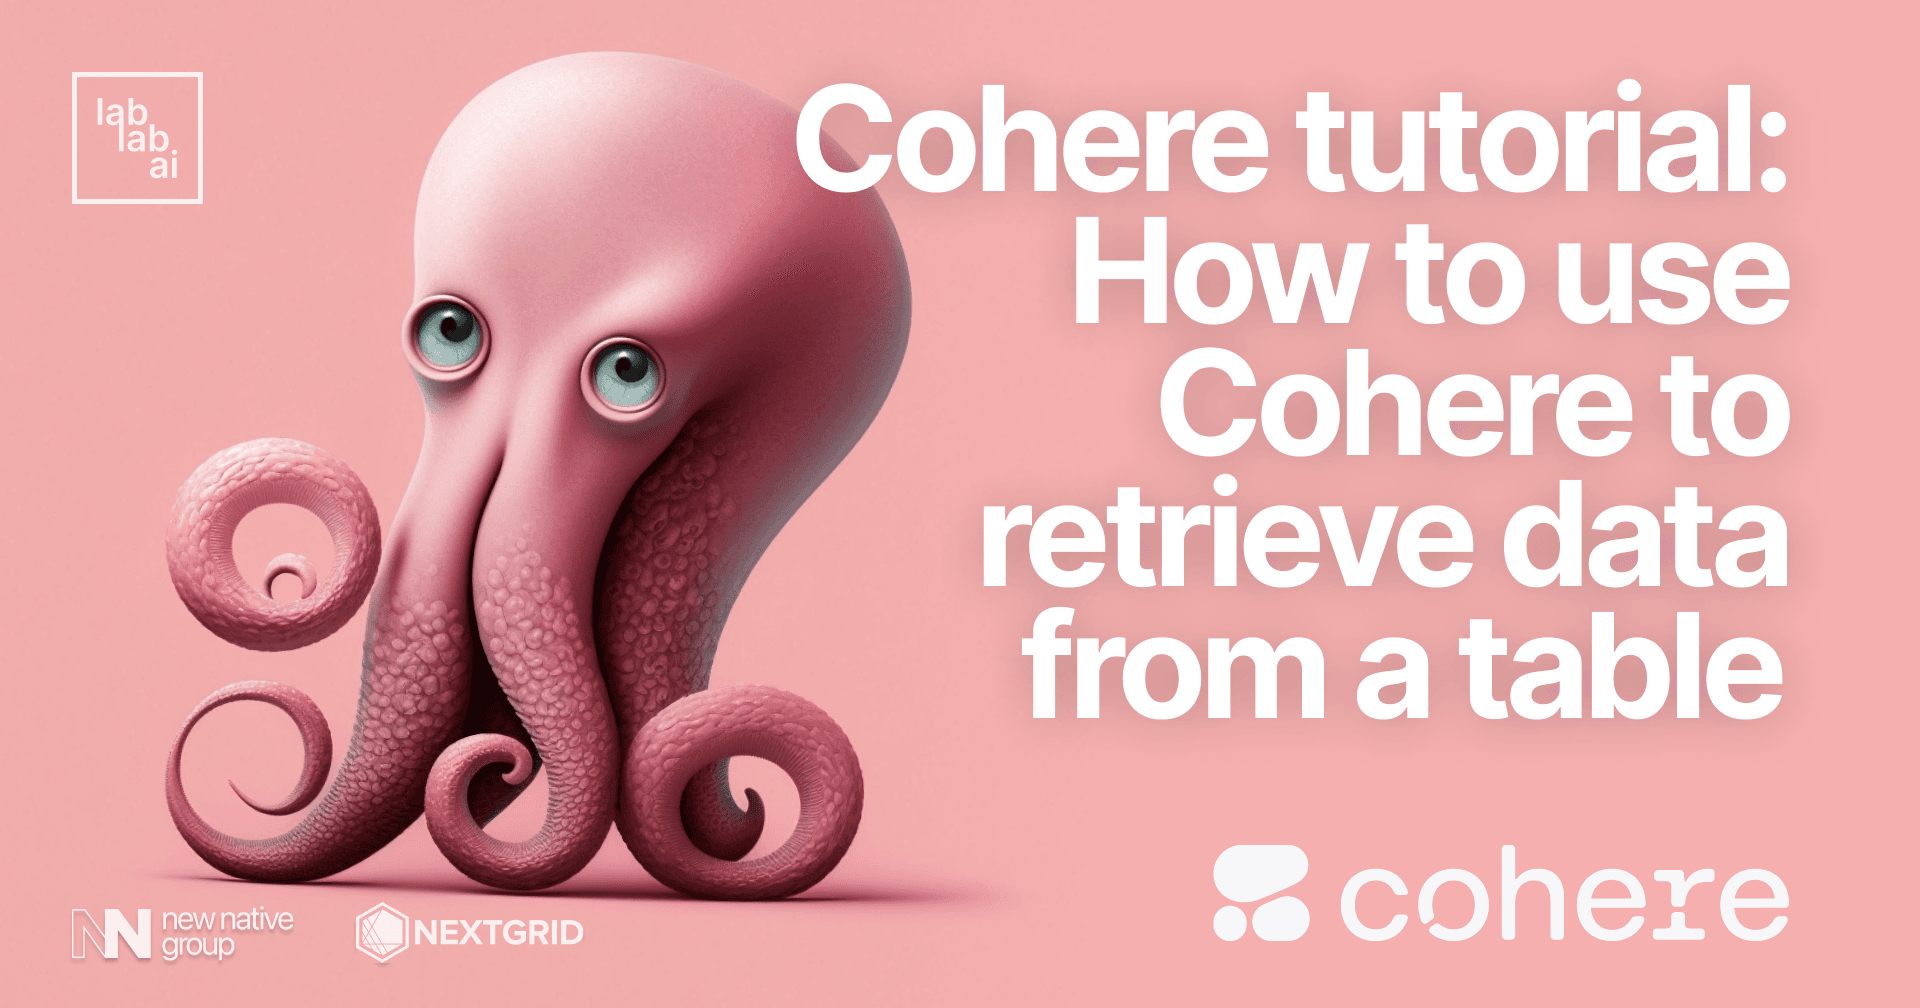 Cohere tutorial: How to use Cohere to retrieve data from a table